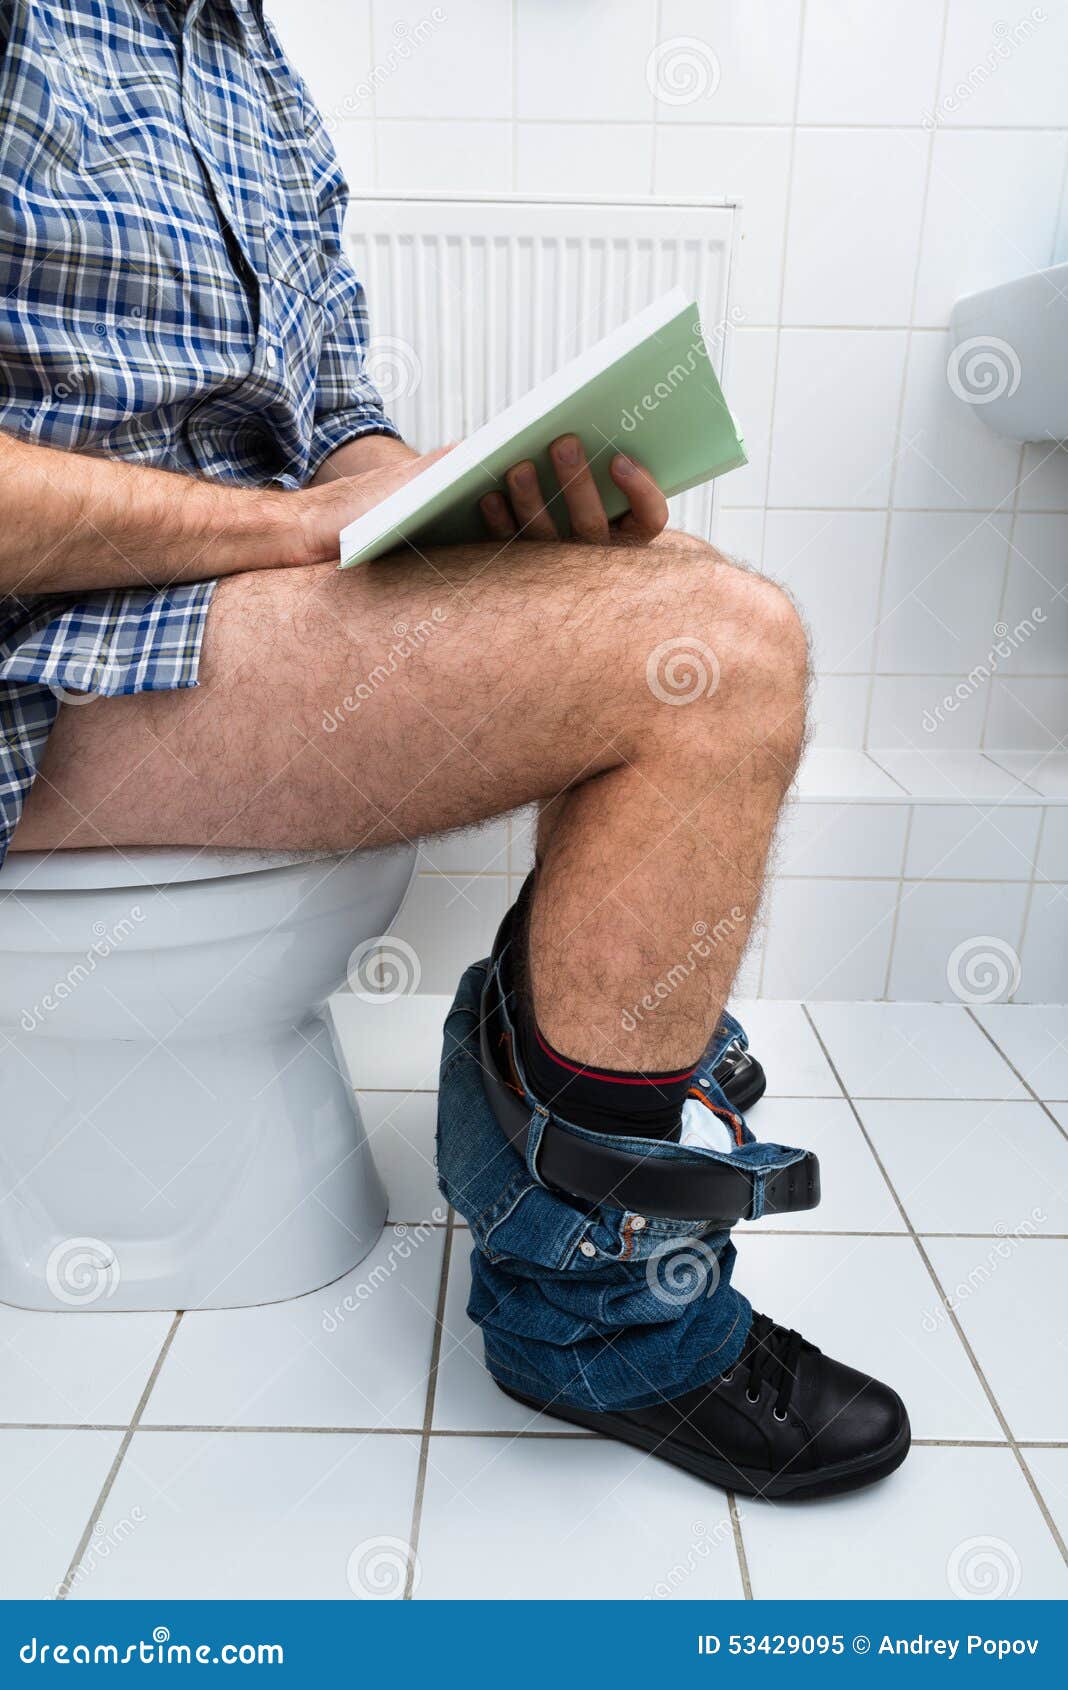 Man With Newspaper Sitting On Toilet Bowl Stock Image 